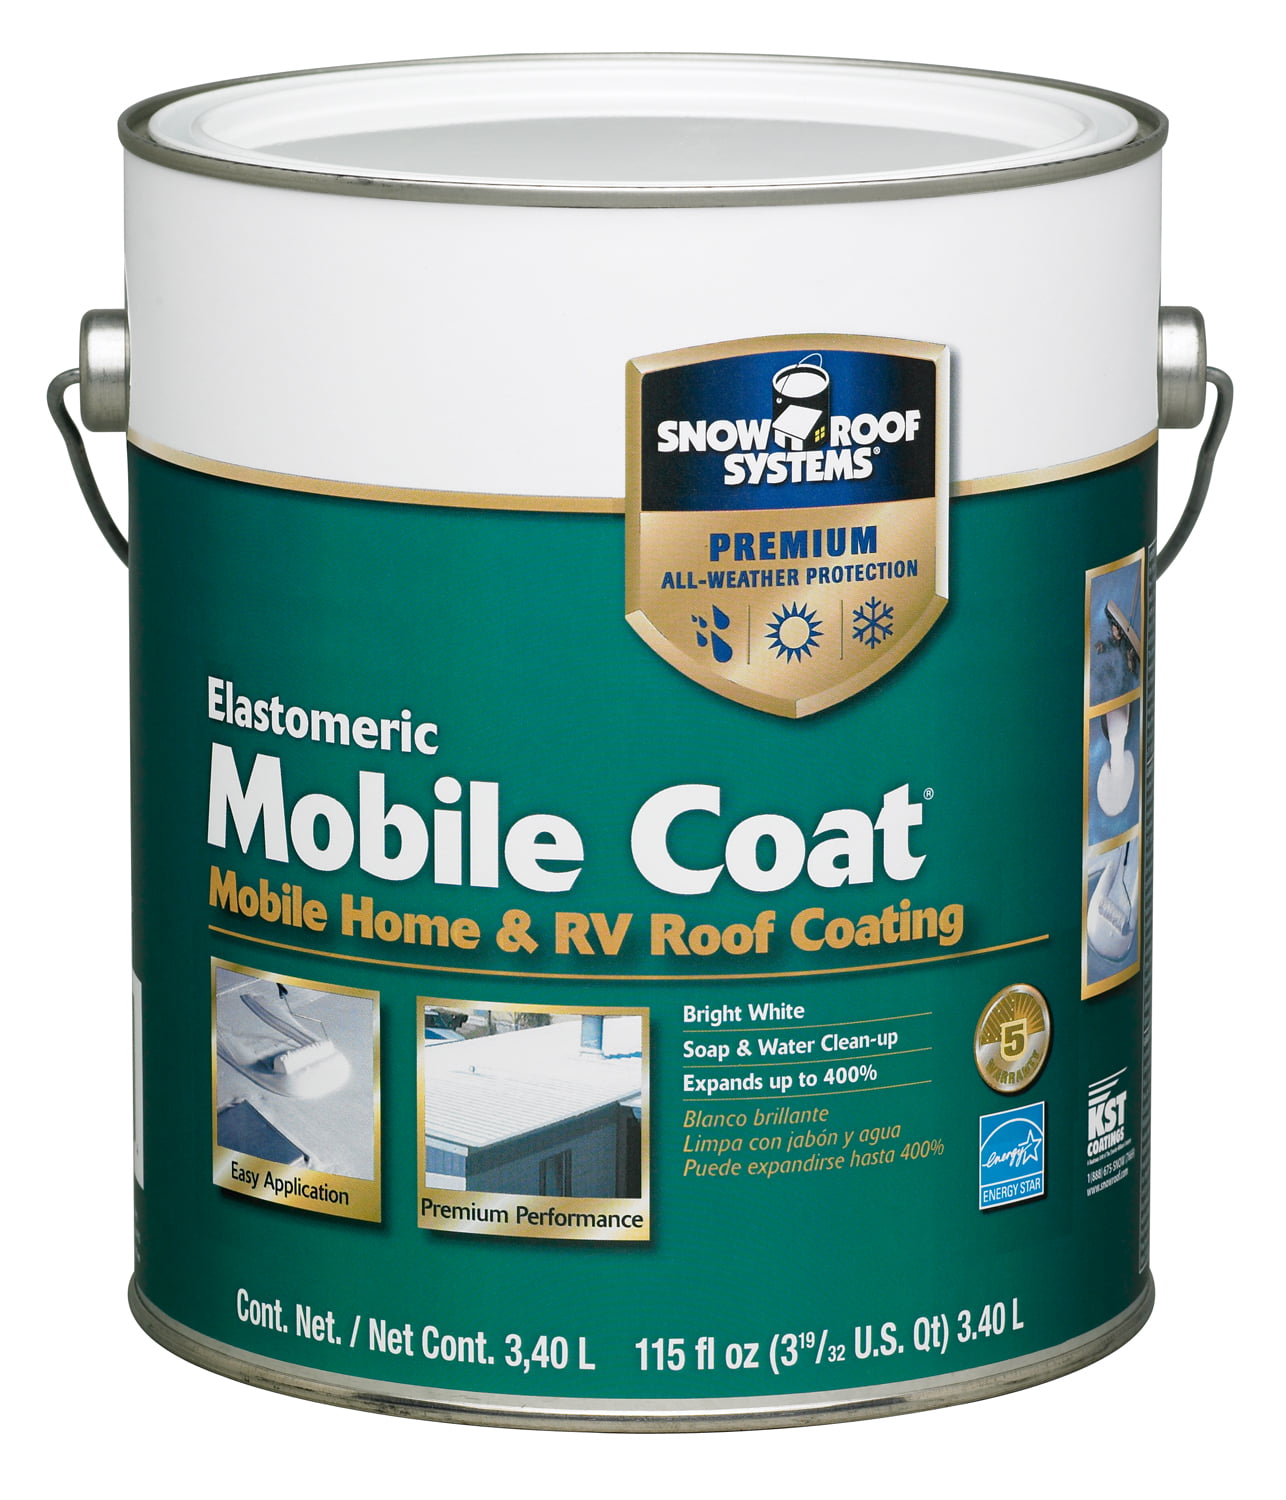 Exploring Mobile Home Roof Coatings: Types, Benefits, and Application